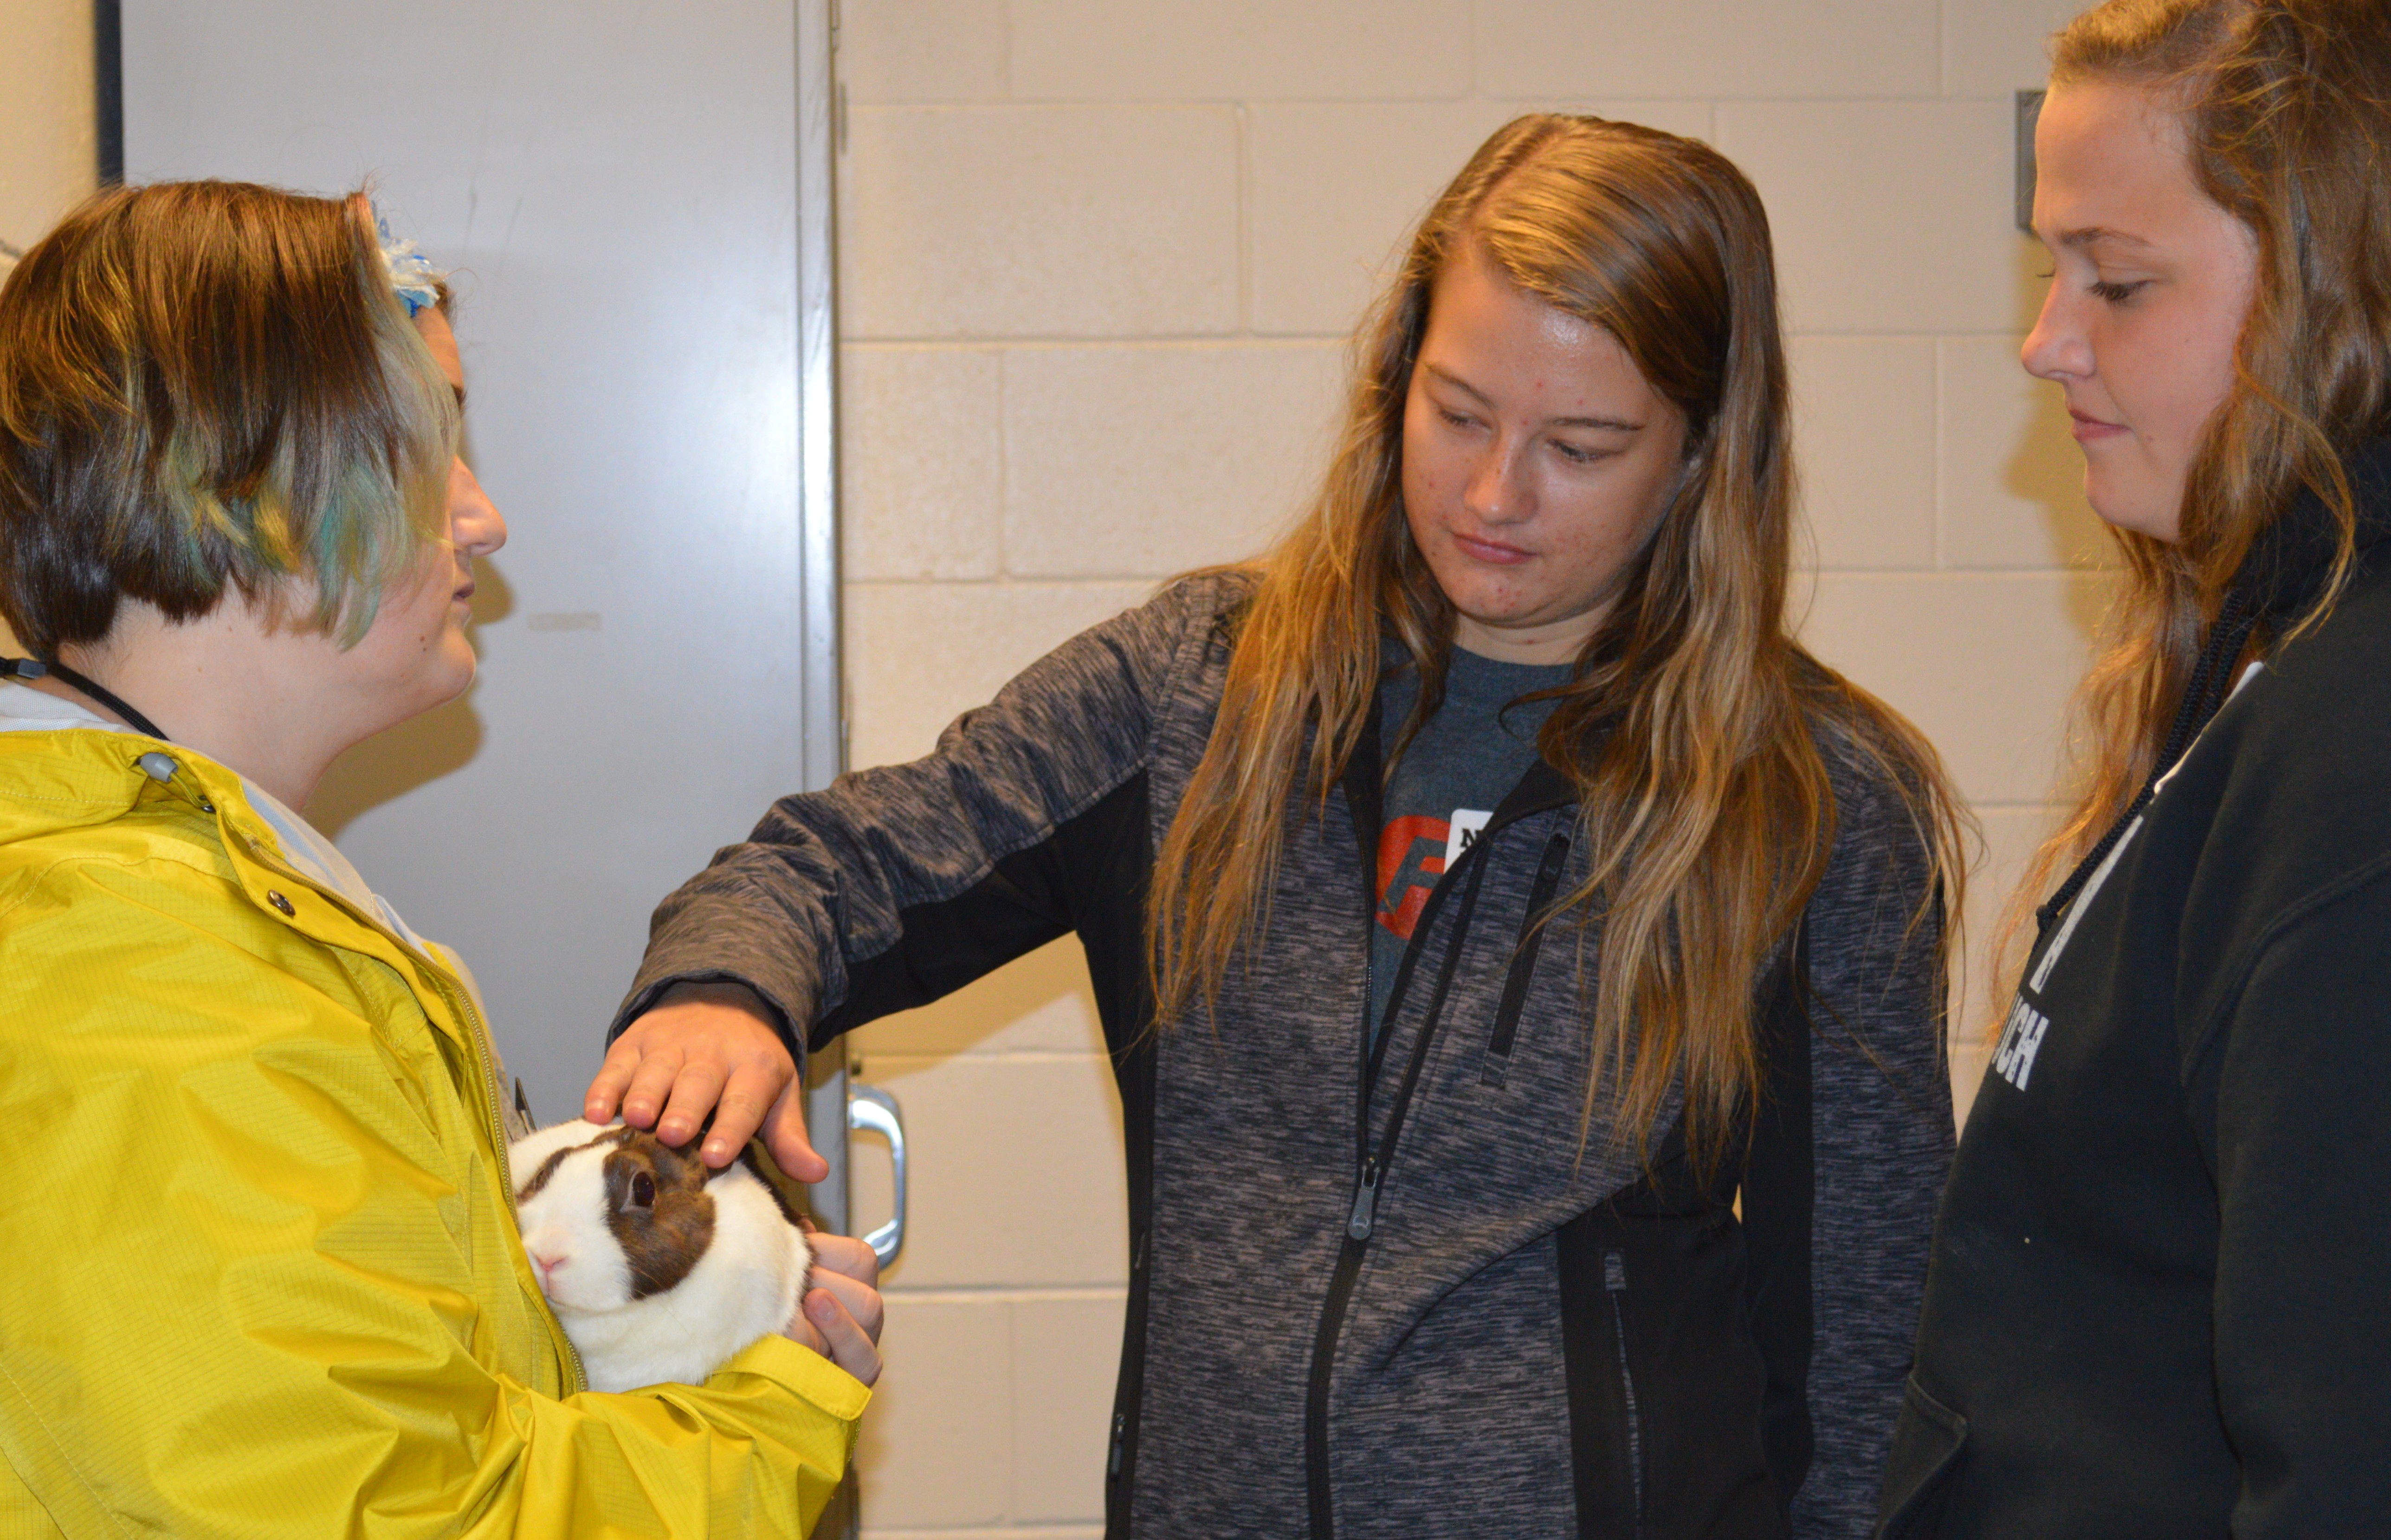 A rabbit at the Veterinary Technology complex drew attention at NCTA Discovery Day in October. Students can tour campus and see academic programs at the Nebraska College of Technical Agriculture in Curtis again on Monday, March 4. (Griffiths/NCTA Photo)